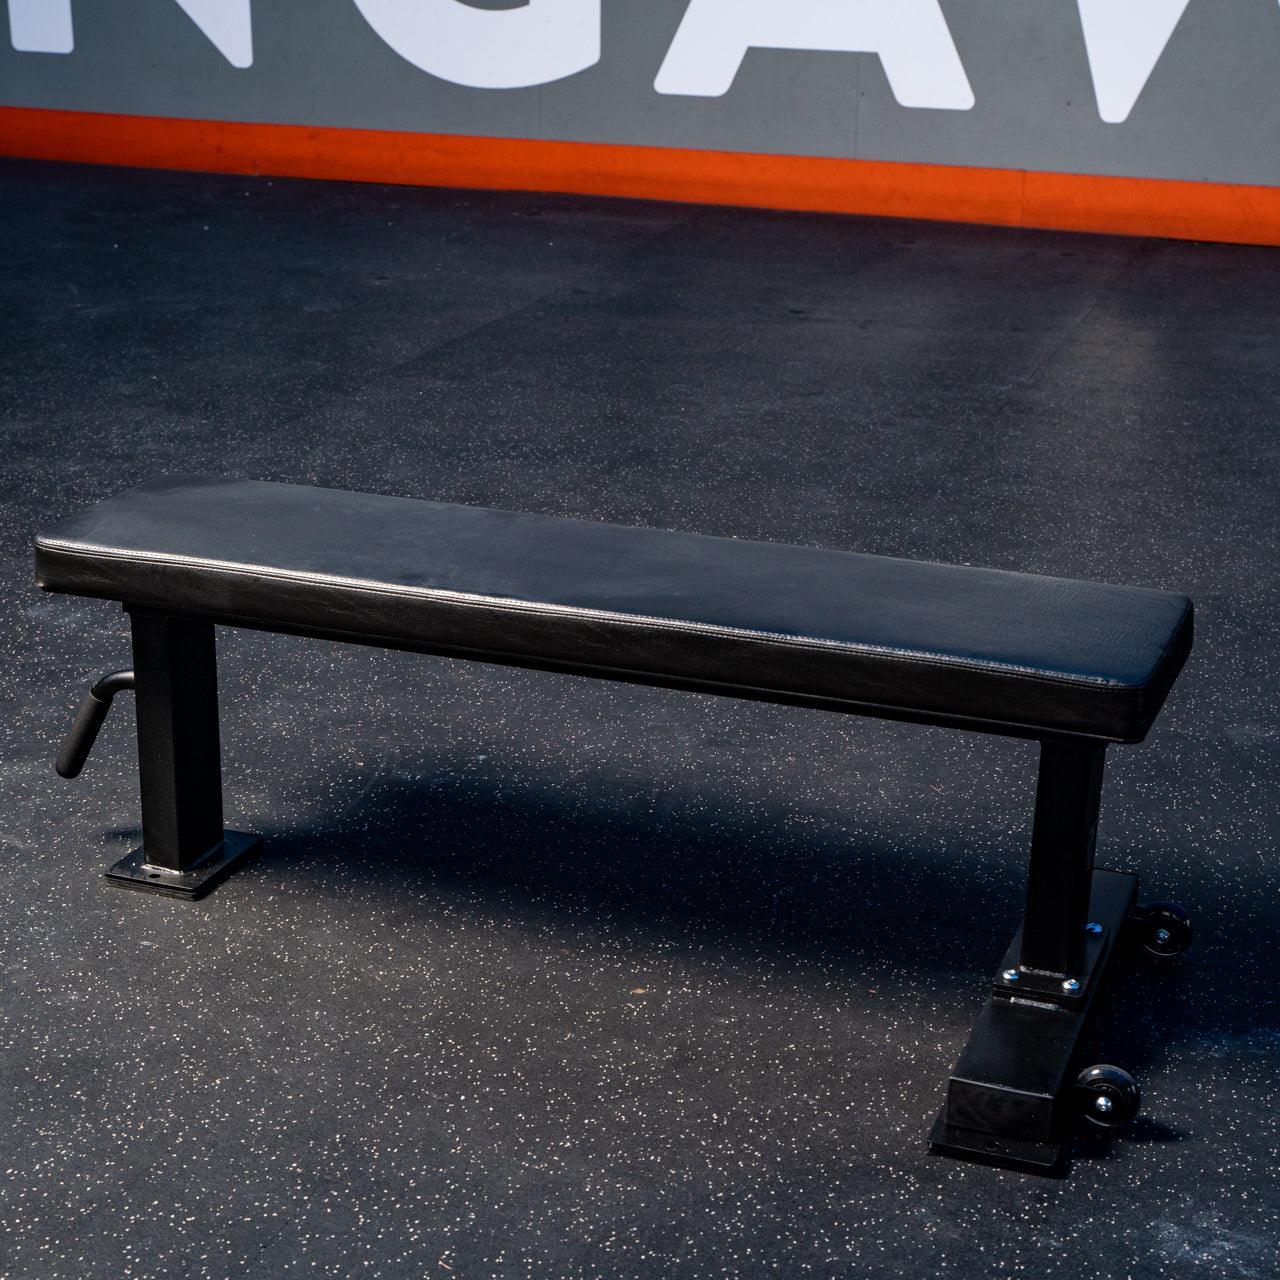 HD Flat Bench 3.0 | Industrial Athletic